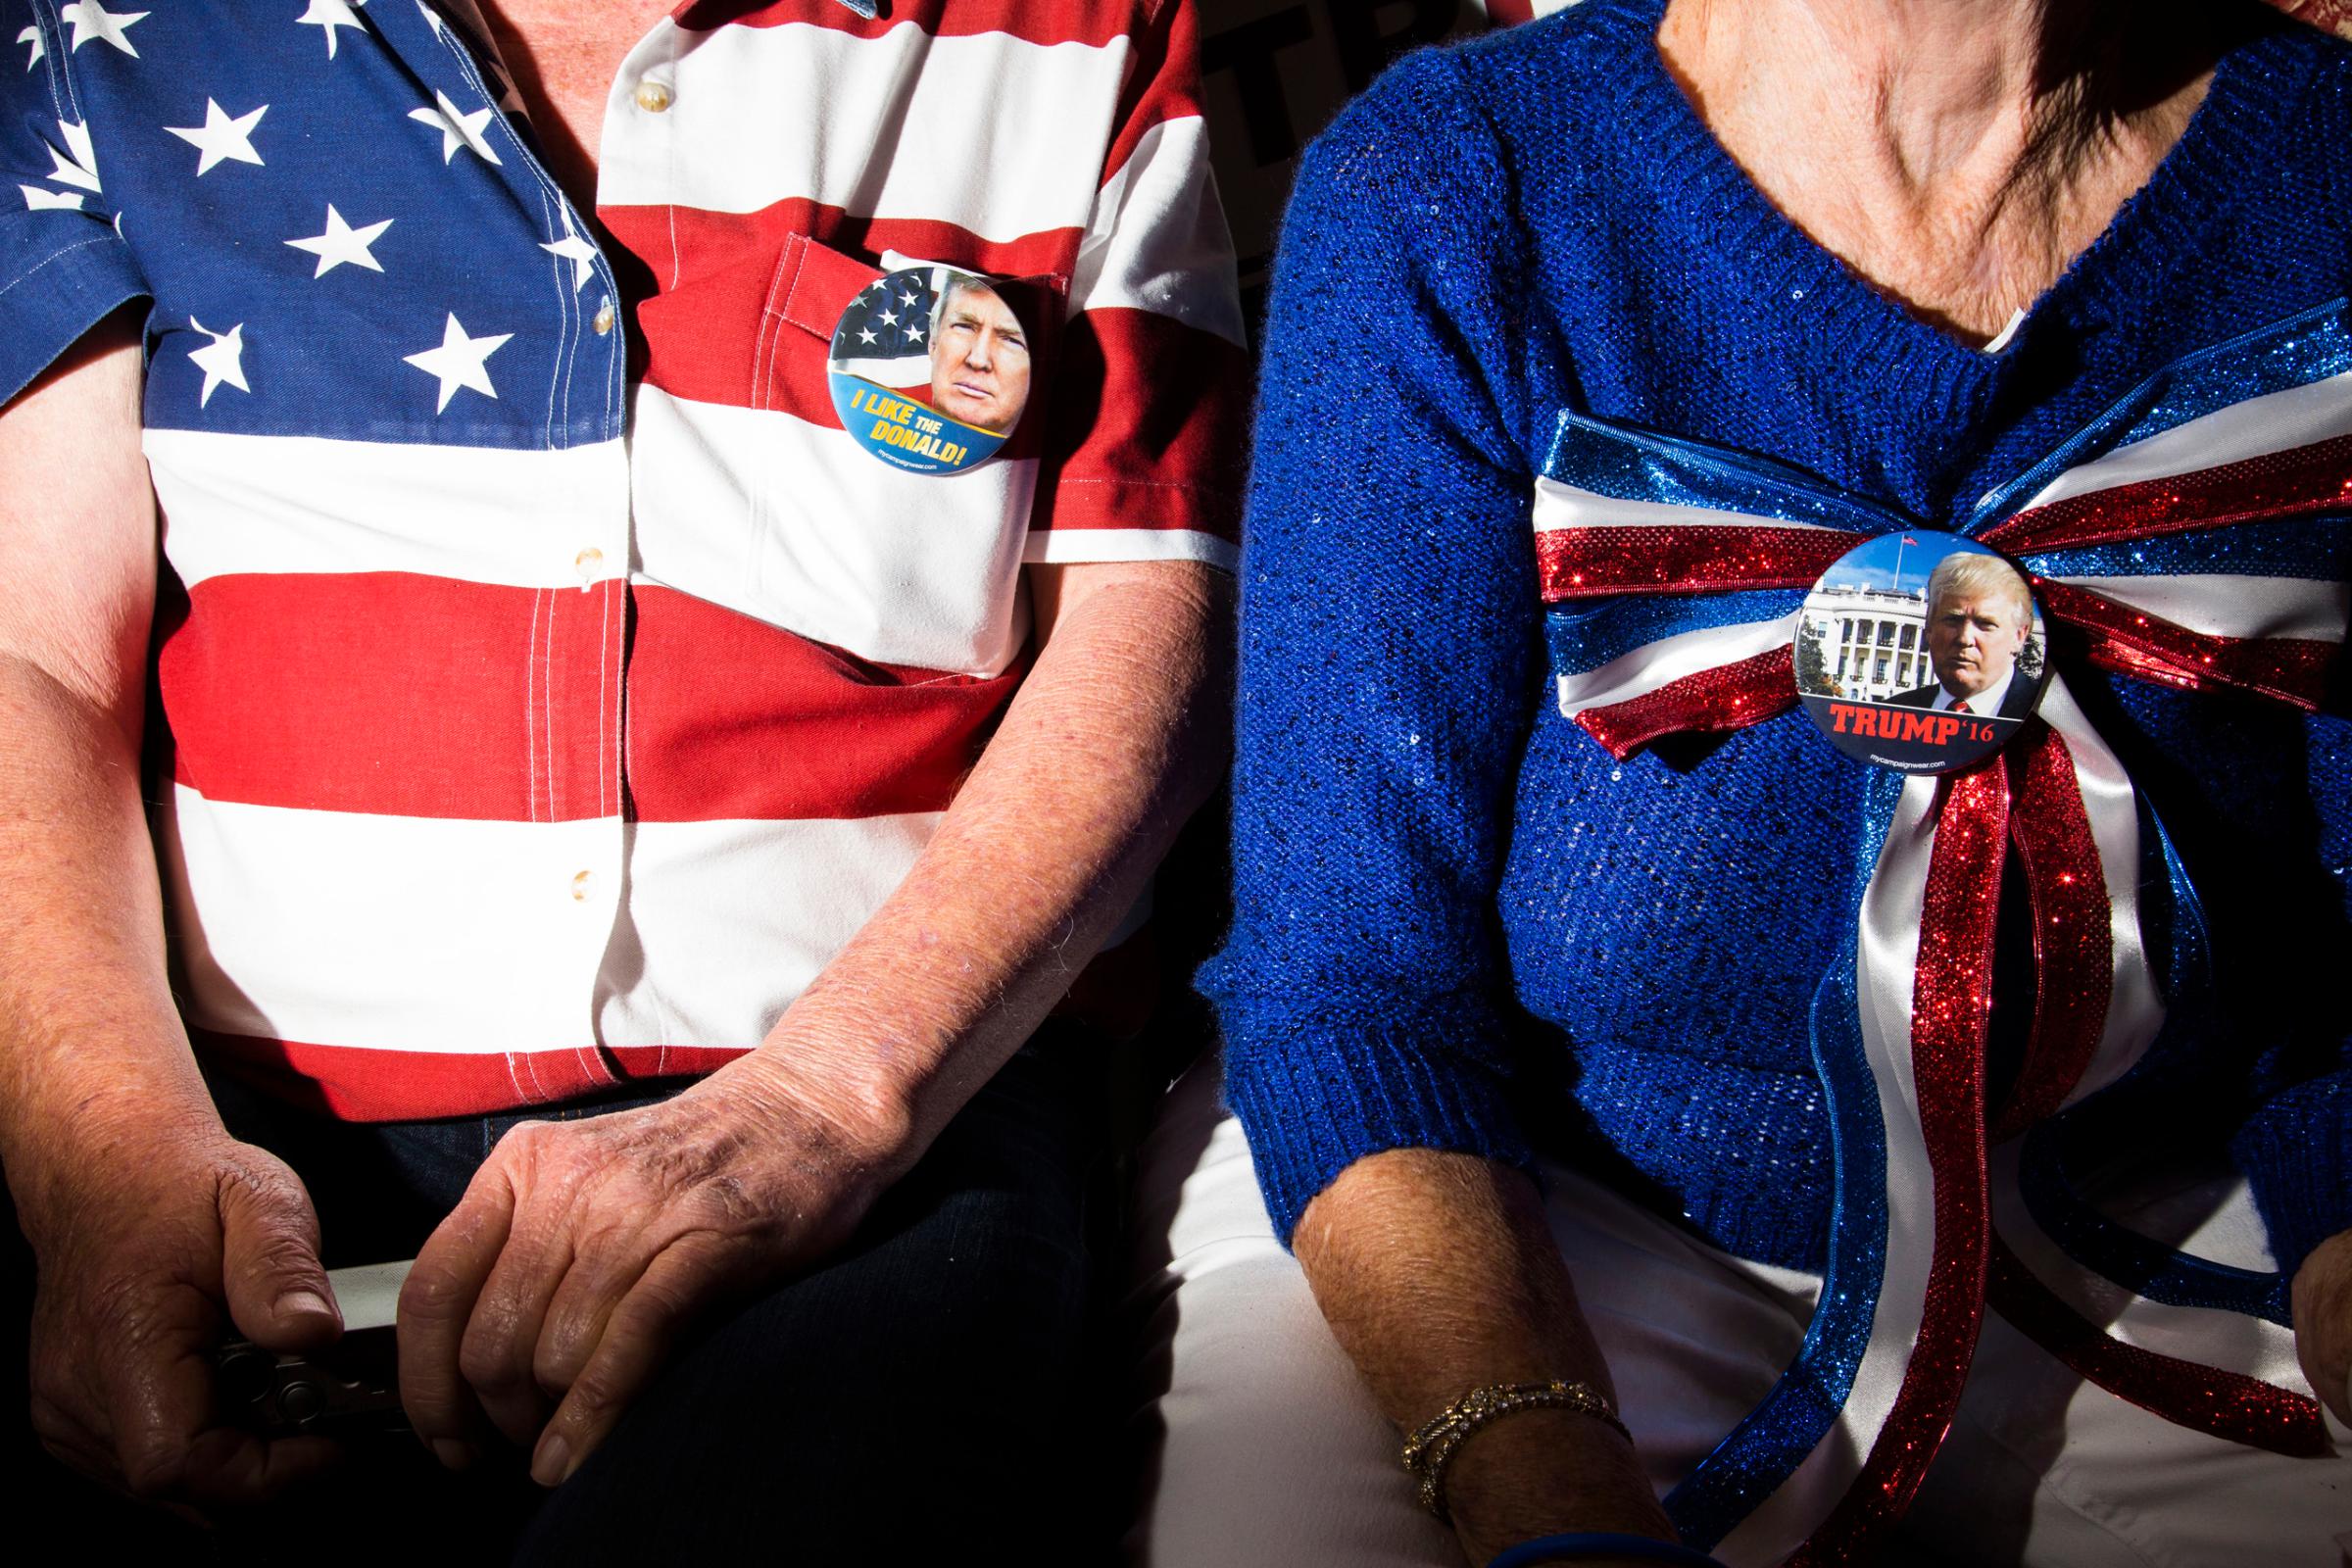 Supporters of Republican presidential candidate Donald Trump at a rally in Sarasota, Fla. Nov. 28, 2015.